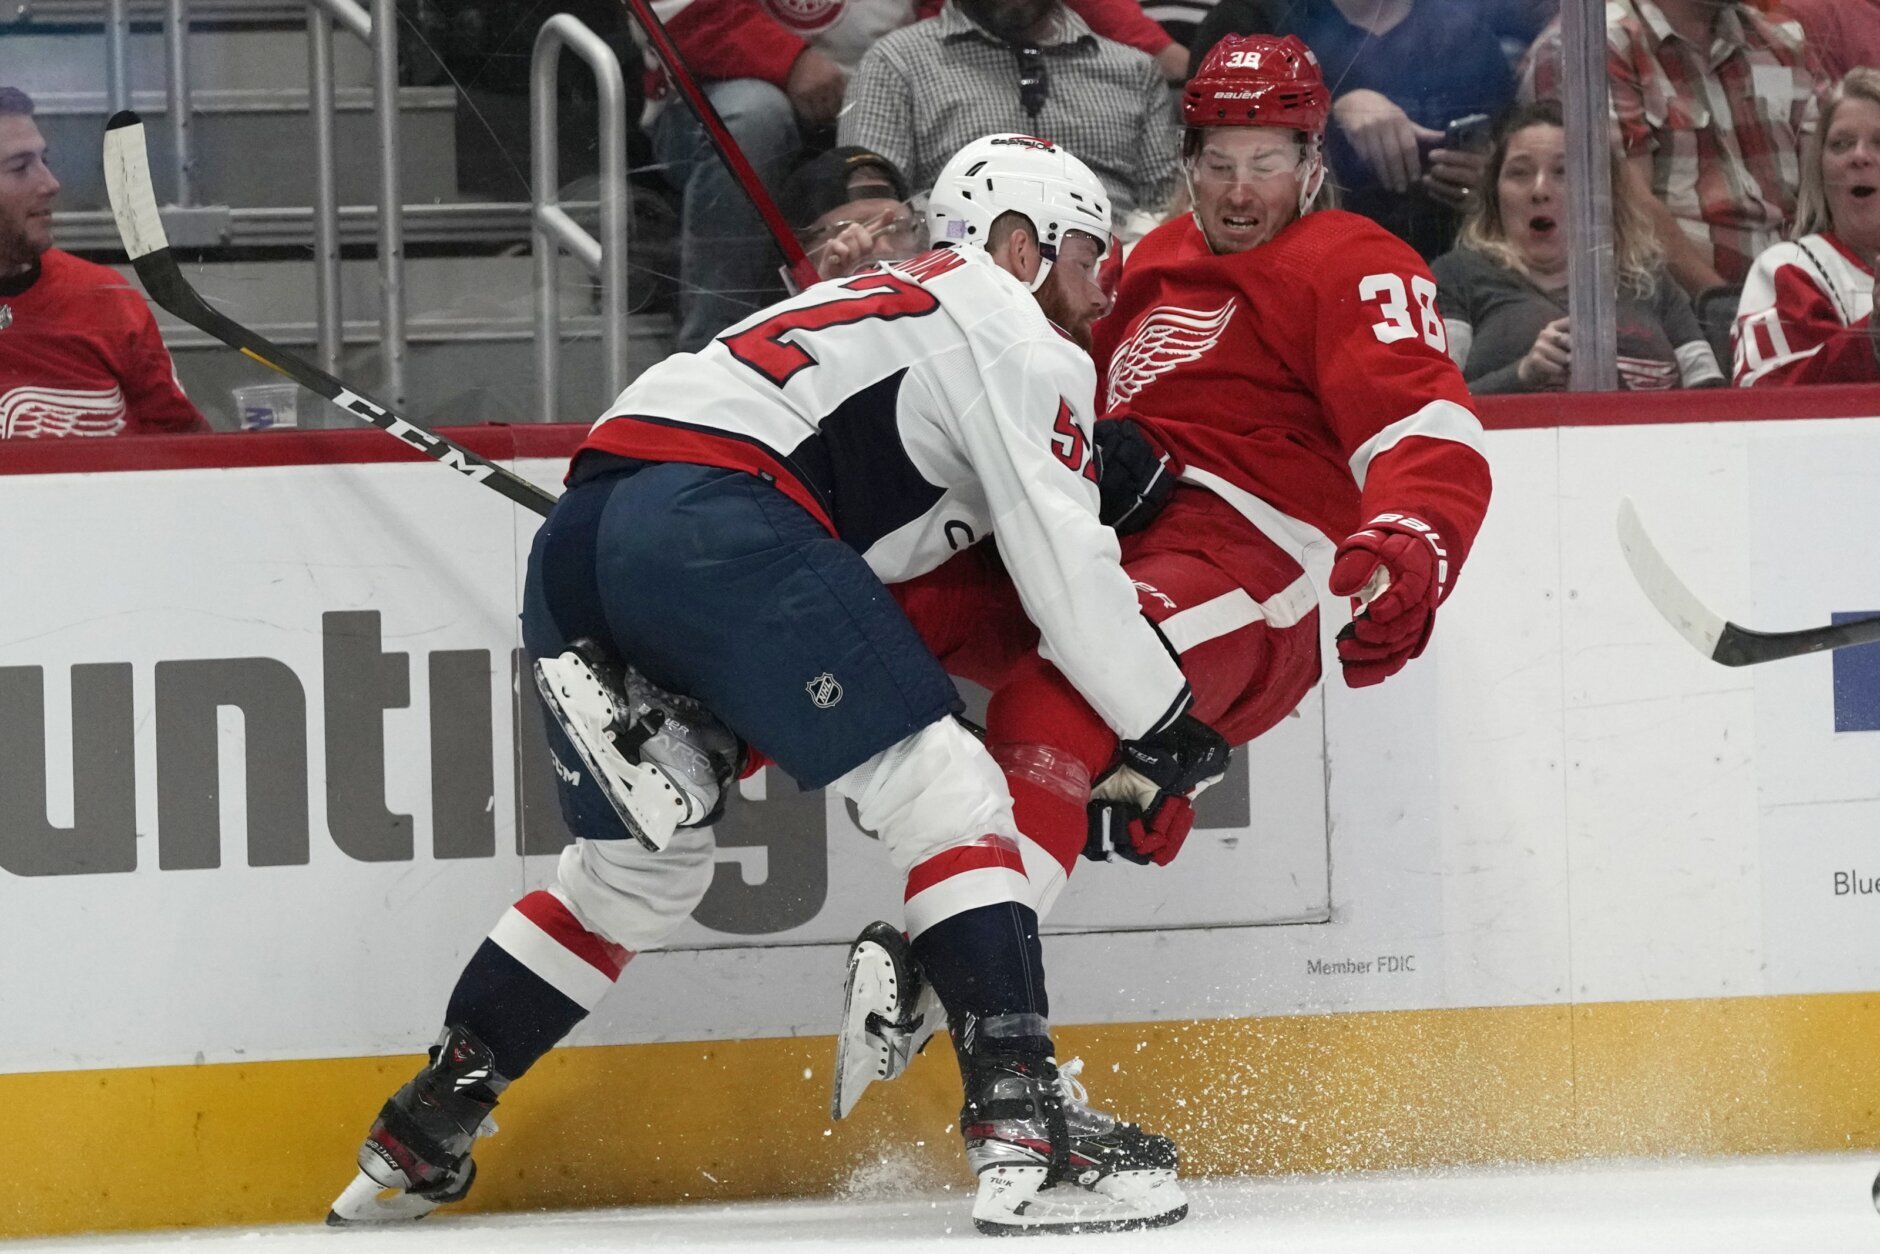 Red Wings 1, Capitals 0